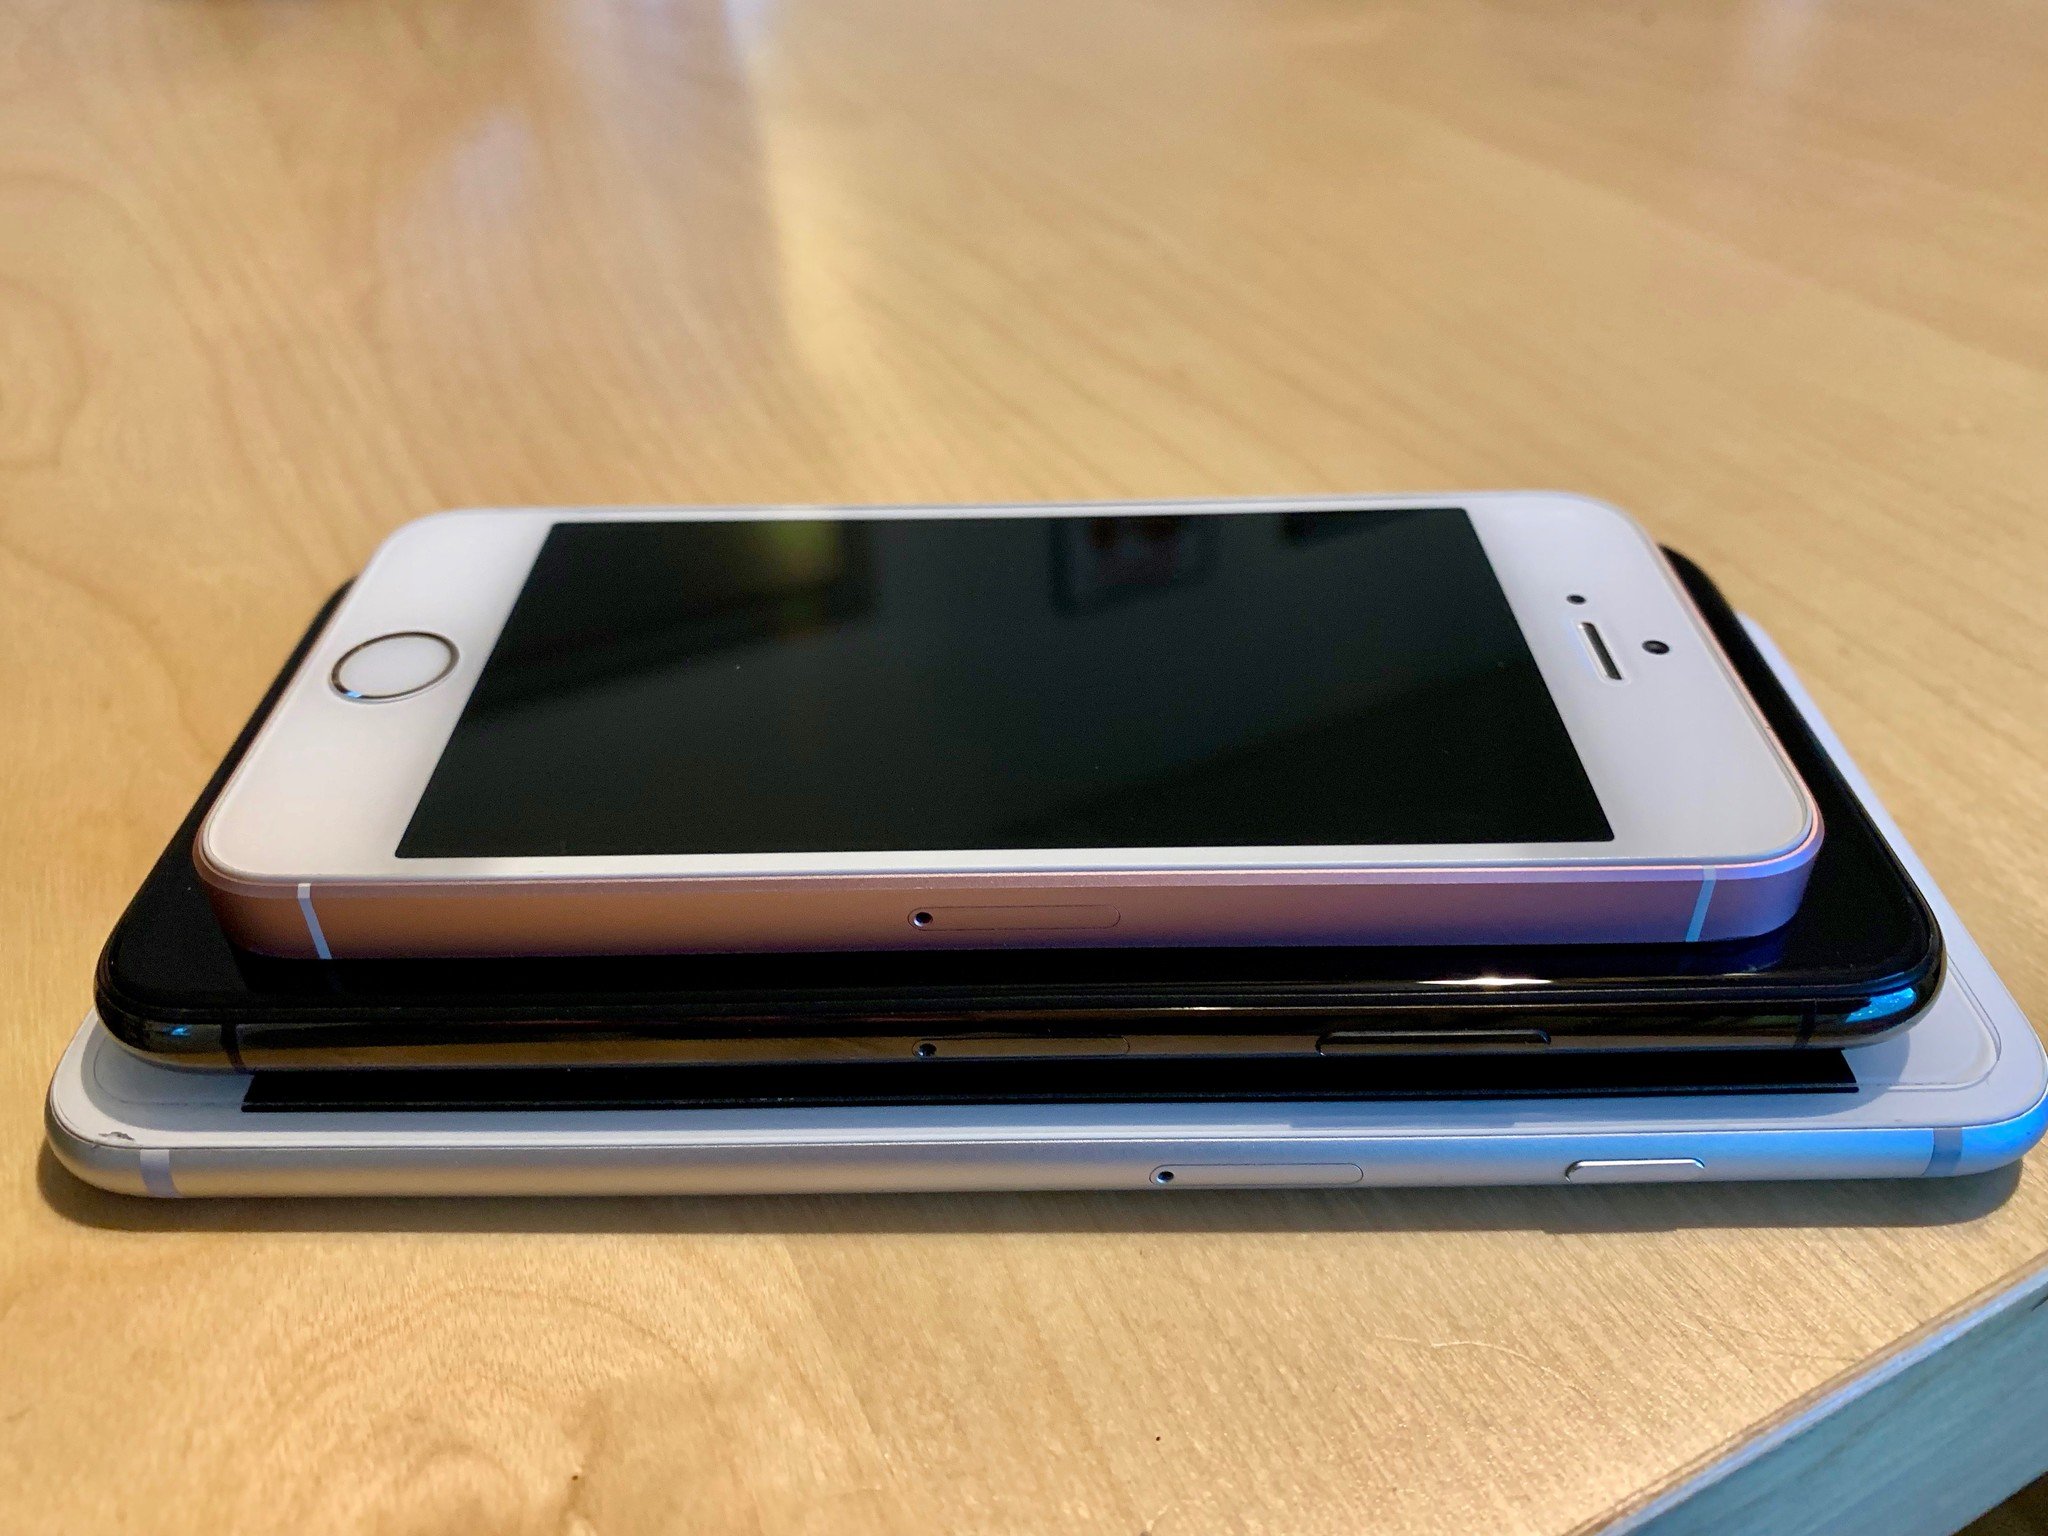 iPhone SE stacked on top of iPhone X and iPhone 7 Plus